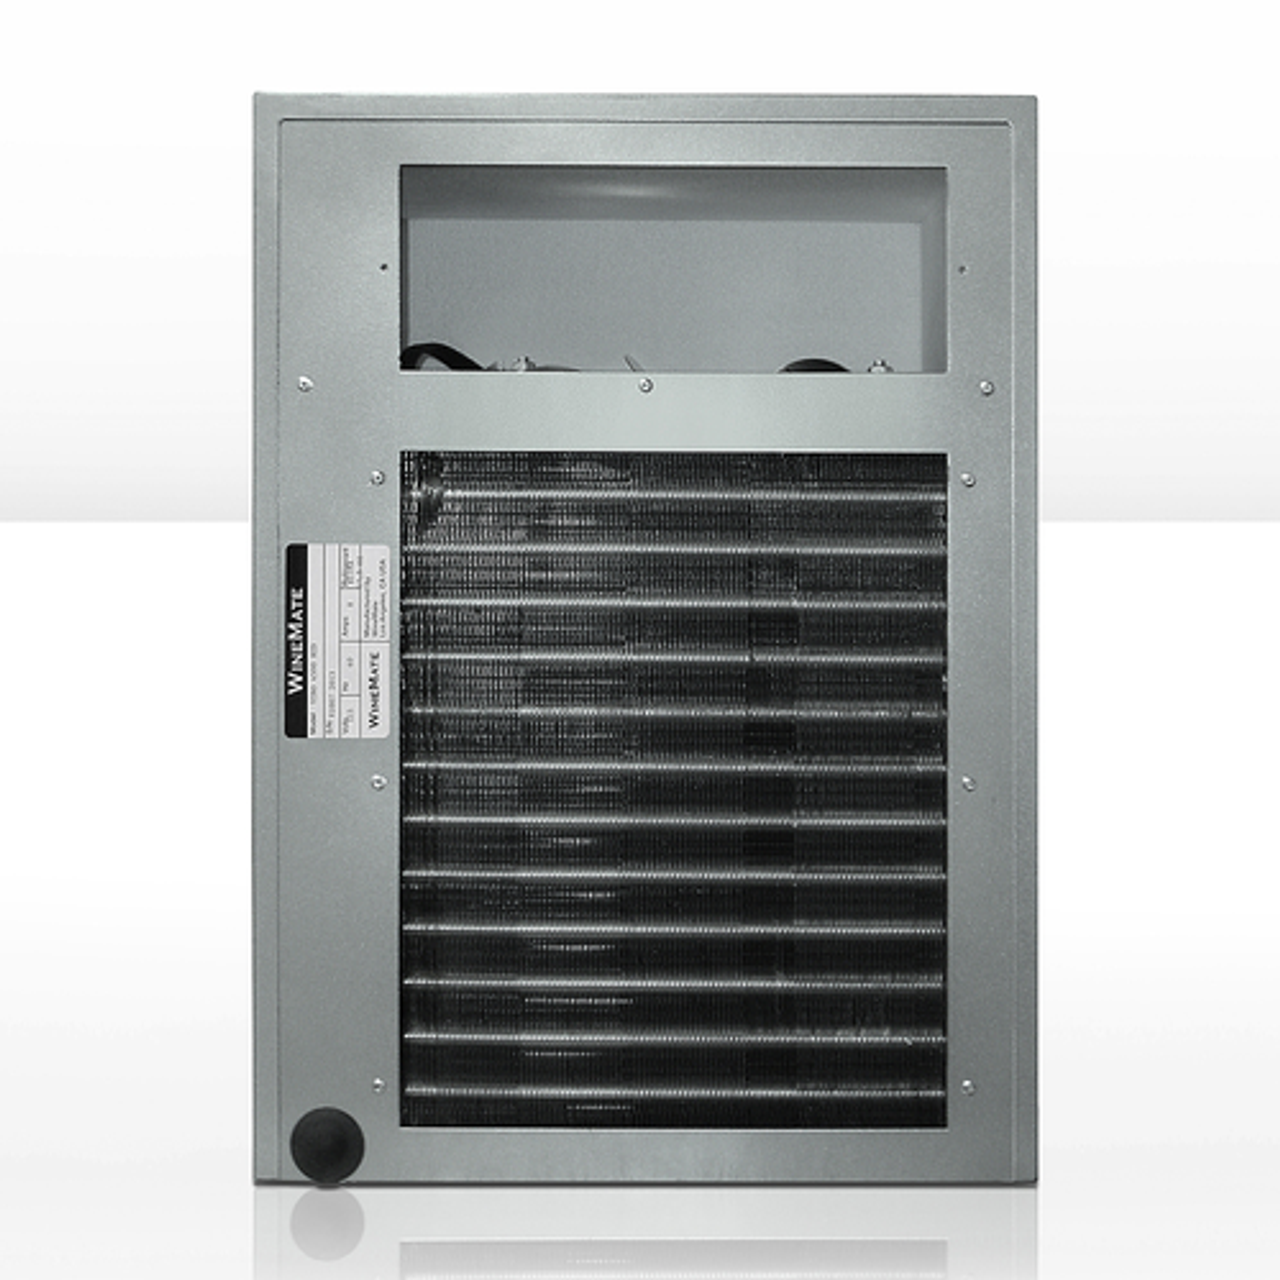 Vinotemp - Wine-Mate 6500HZD Self-Contained Cellar Cooling System